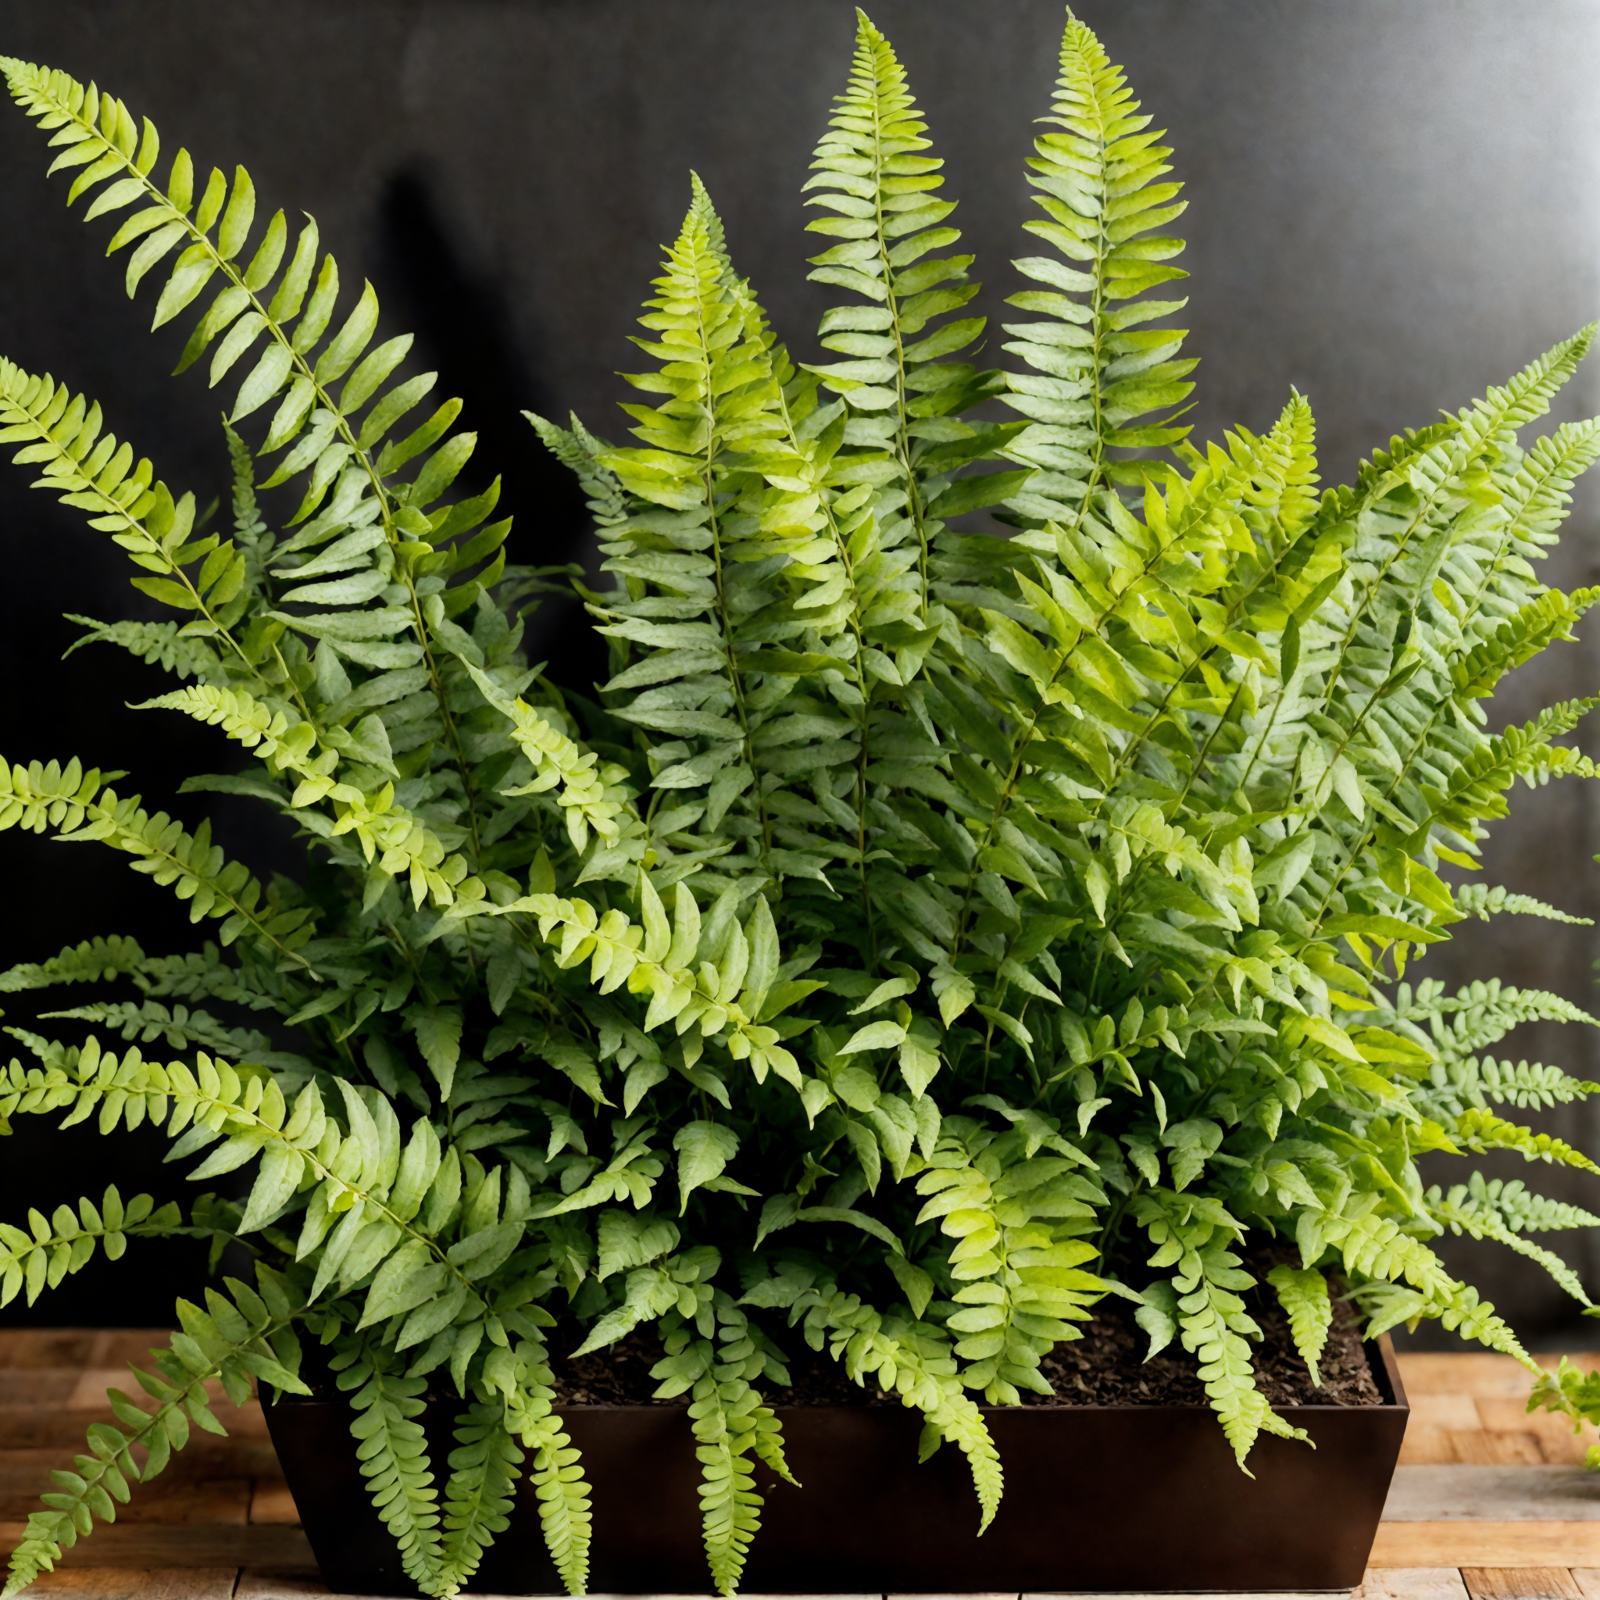 Nephrolepis cordifolia ferns in a planter on a wood floor, with clear lighting and a dark background.